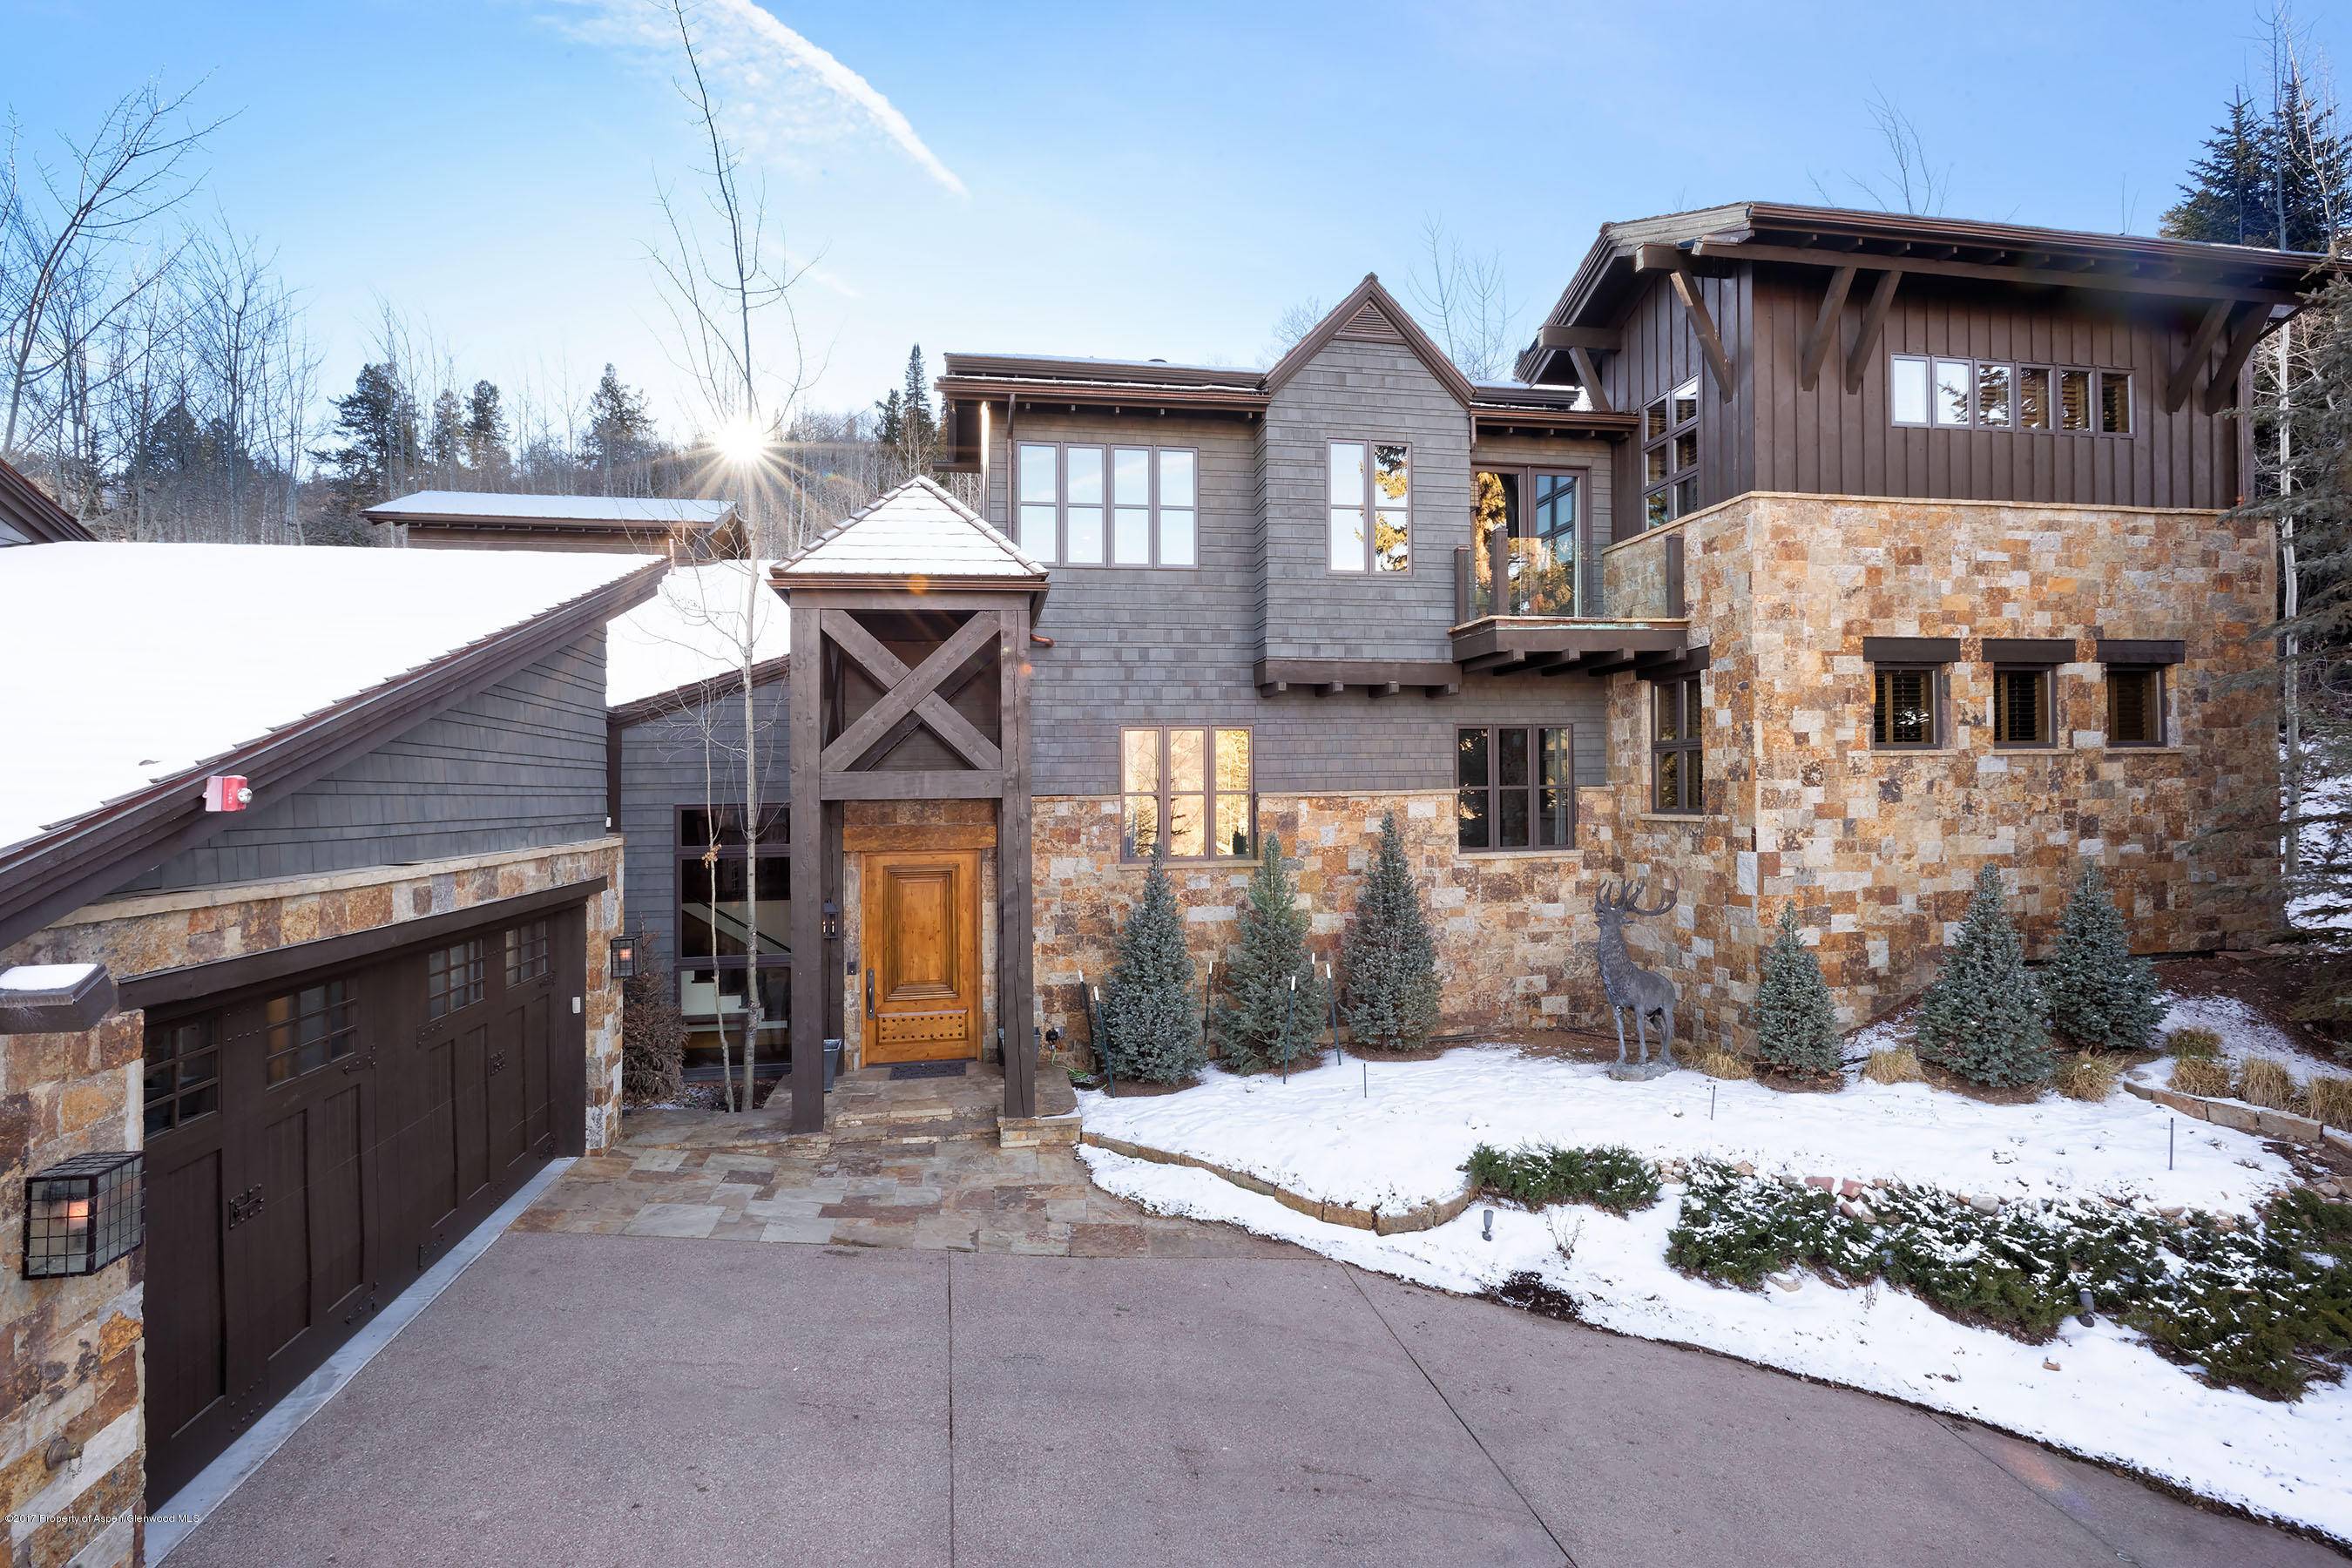 This beautiful estate boasts SKI ACCESS to and from Oregon Trail to ski Tiehack and Buttermilk.